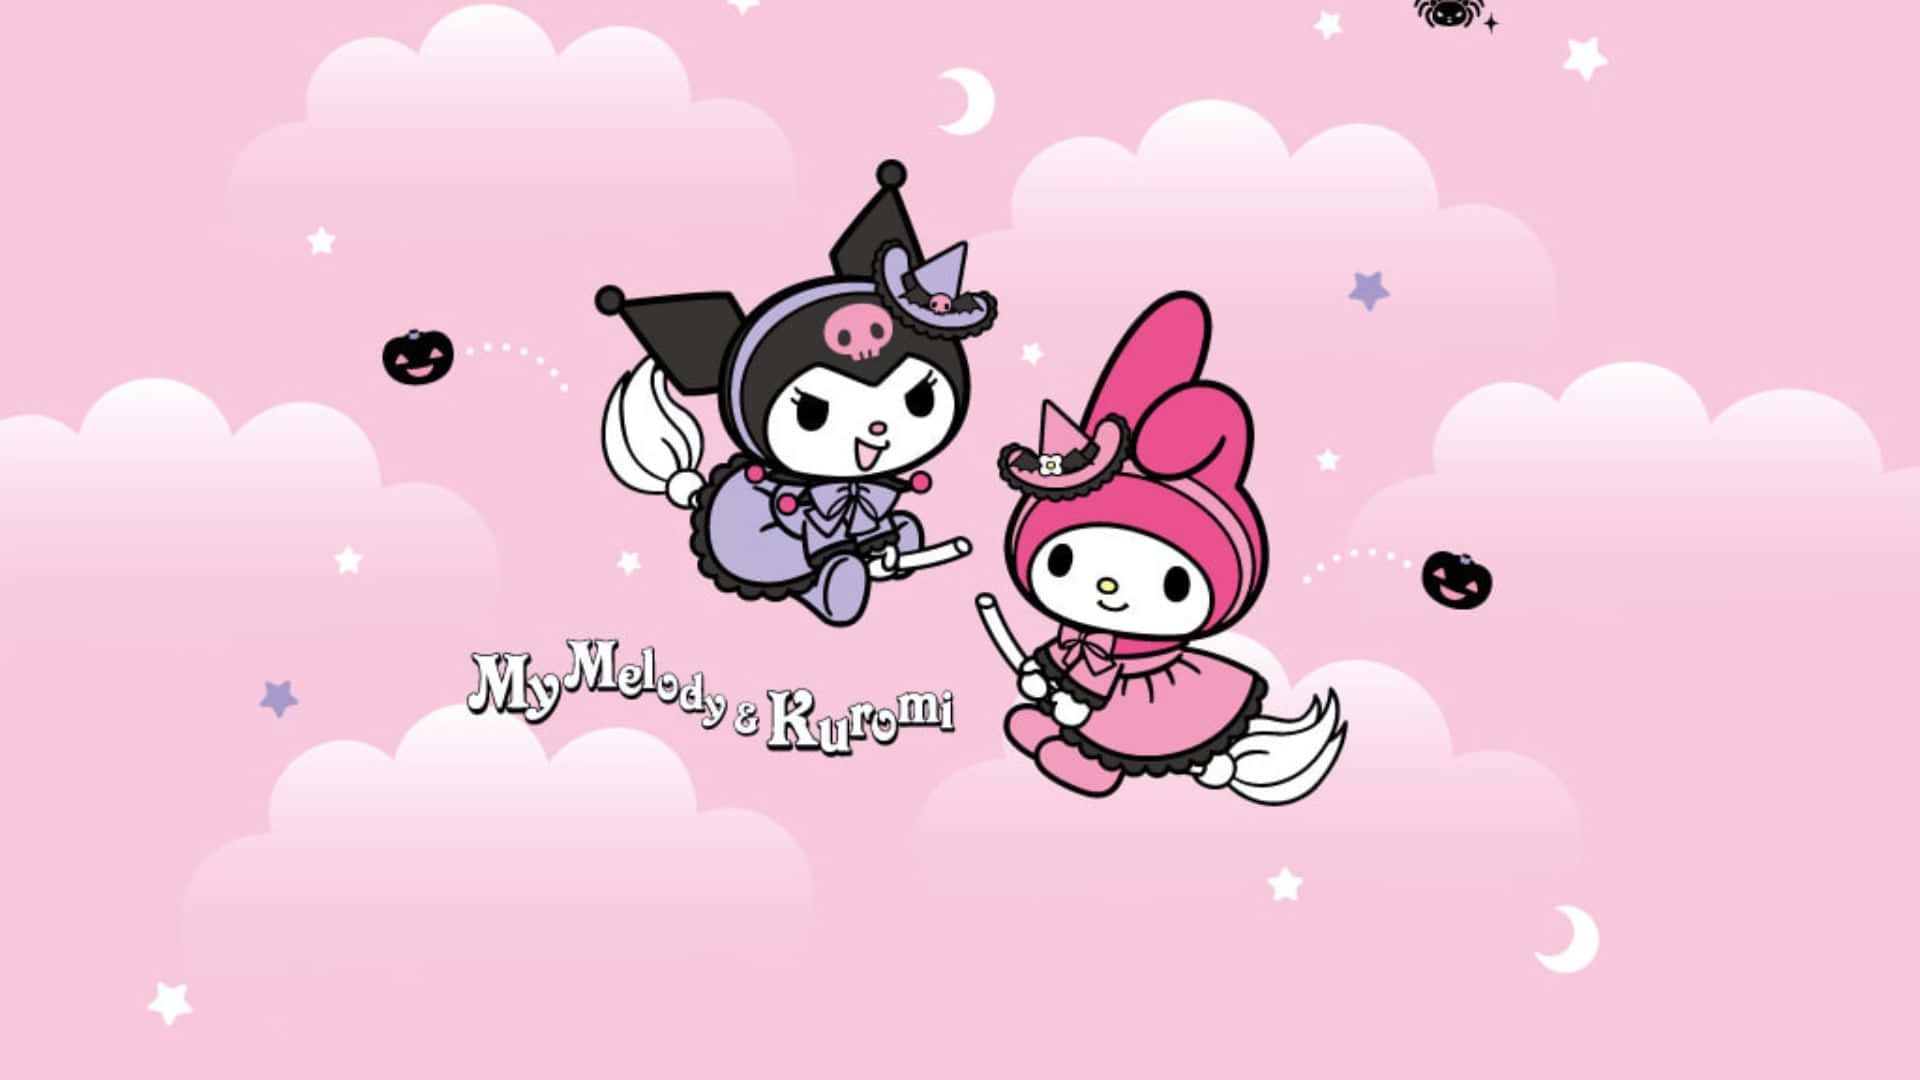 Kuromi and My Melody Posing Together against a Pink Background Wallpaper